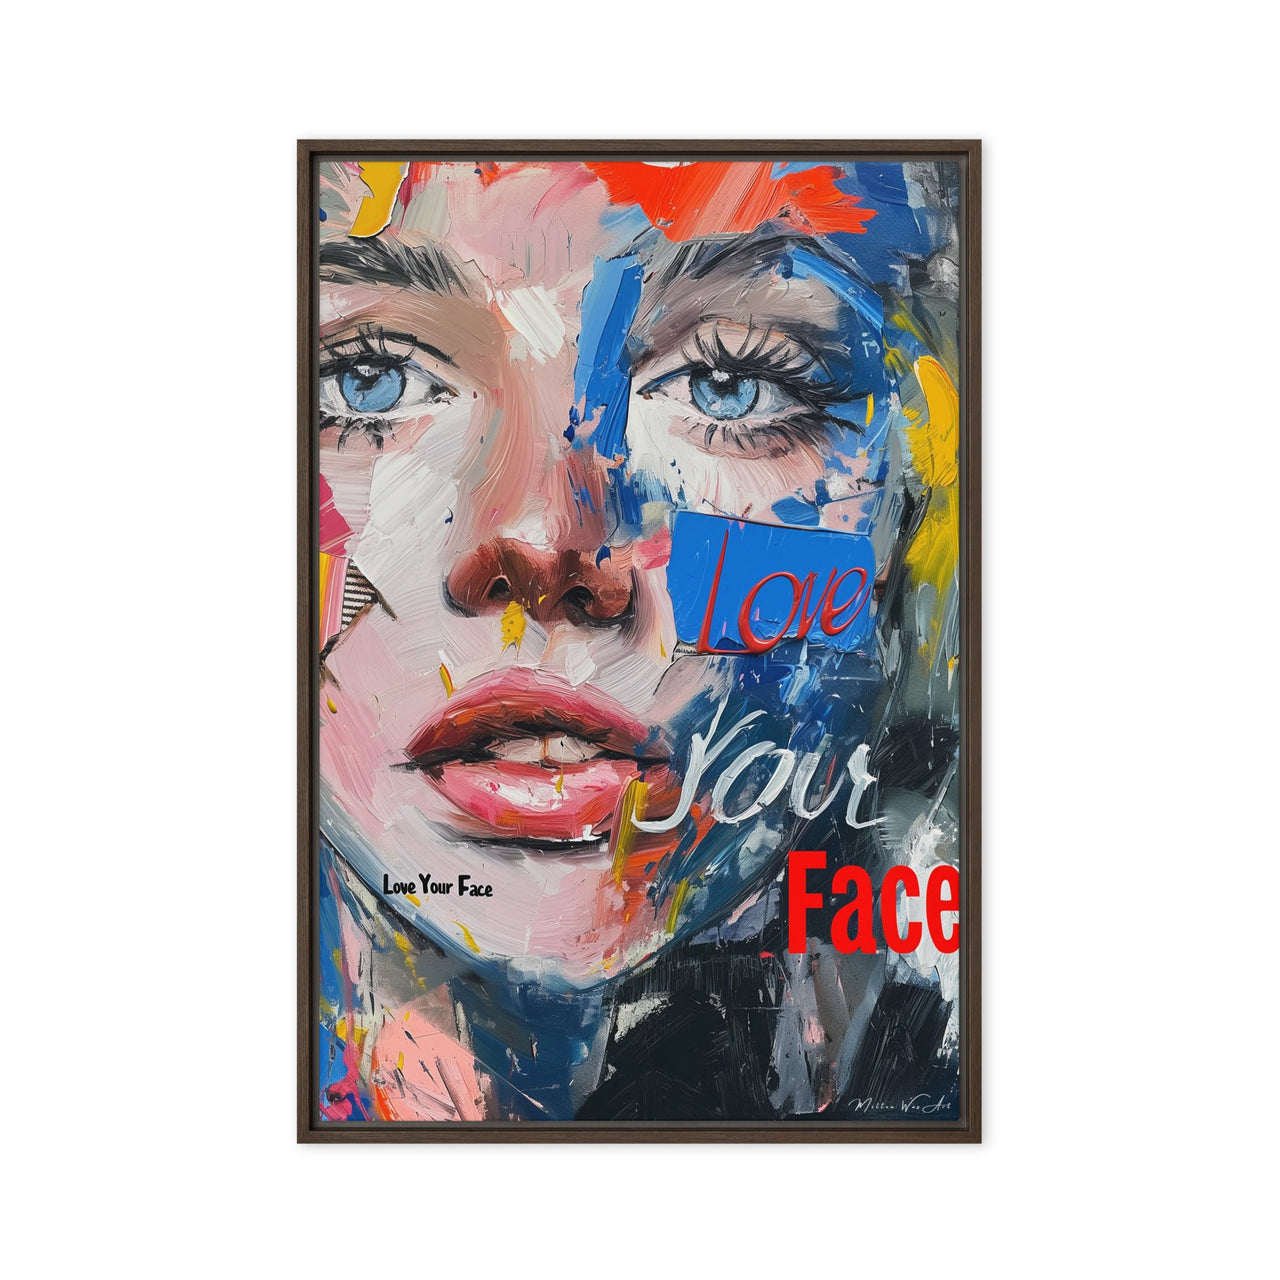 Vivid framed canvas print with an abstract depiction of a face and 'Love Your Face' text, offering a burst of color to a modern room, from Milton Wes Art at miltonwesart.com, Harlem NYC